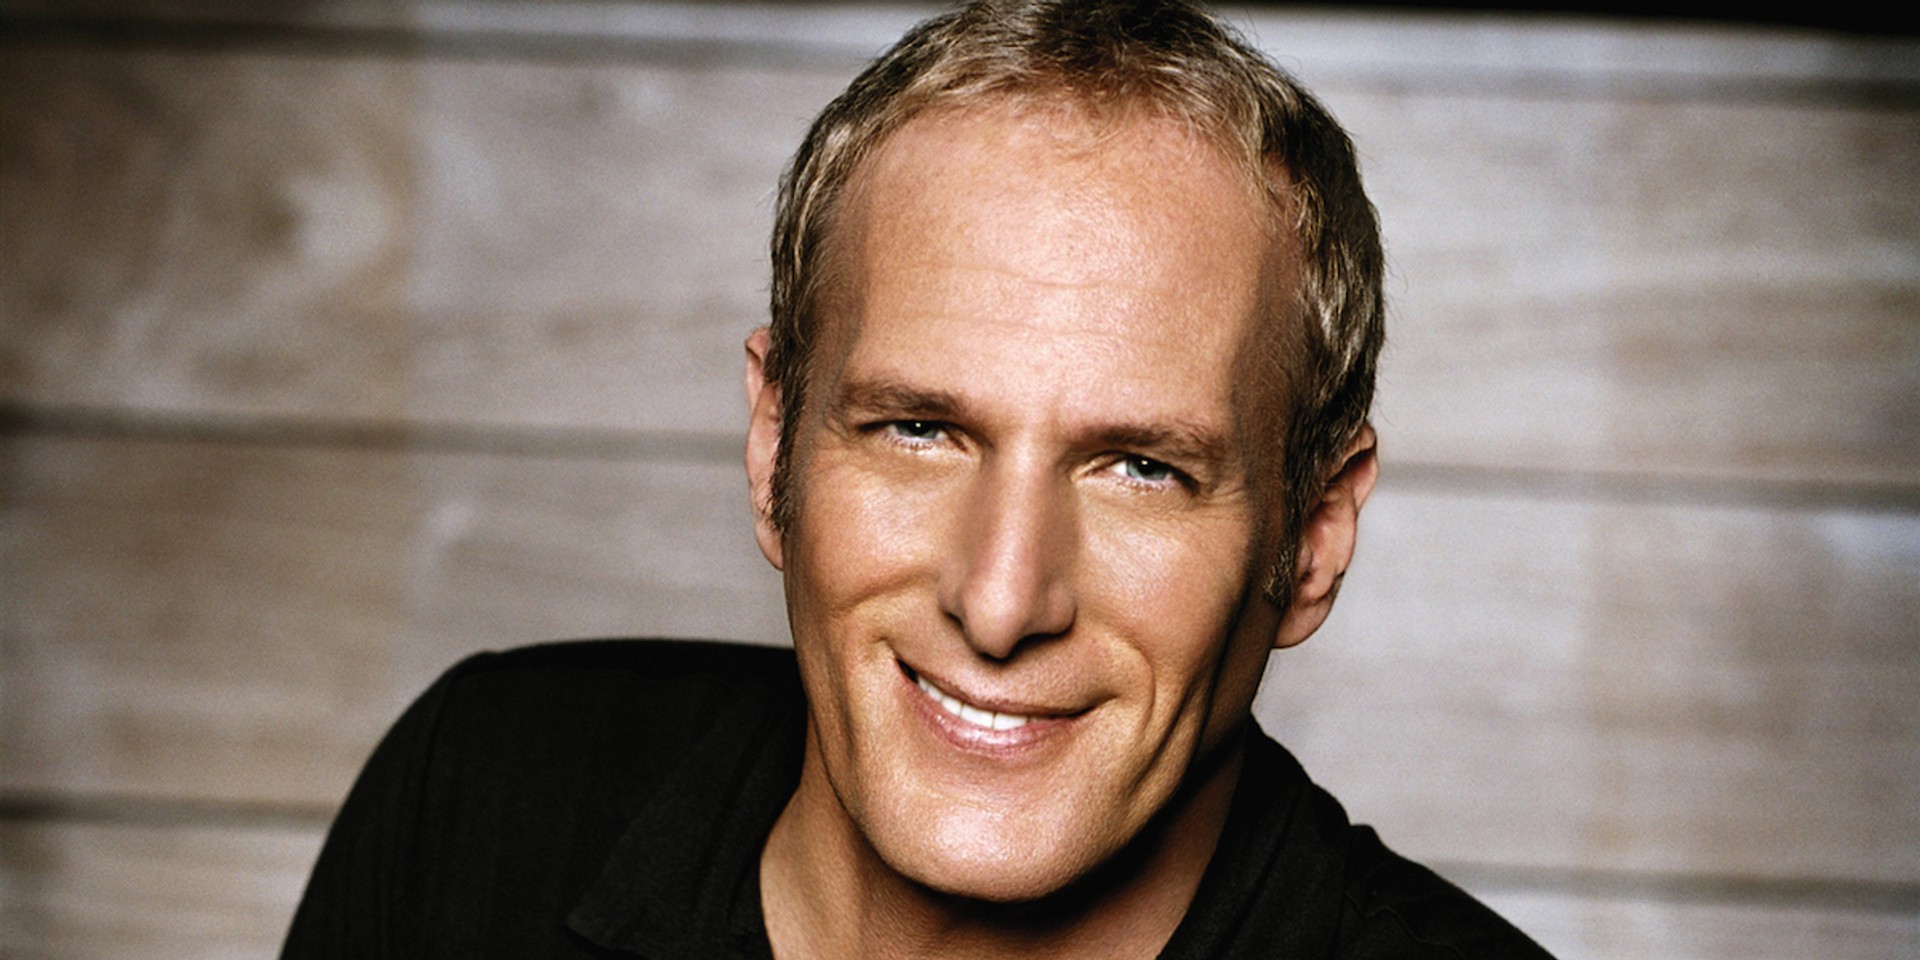 Michael Bolton tries out a Sam Willows song for size — watch